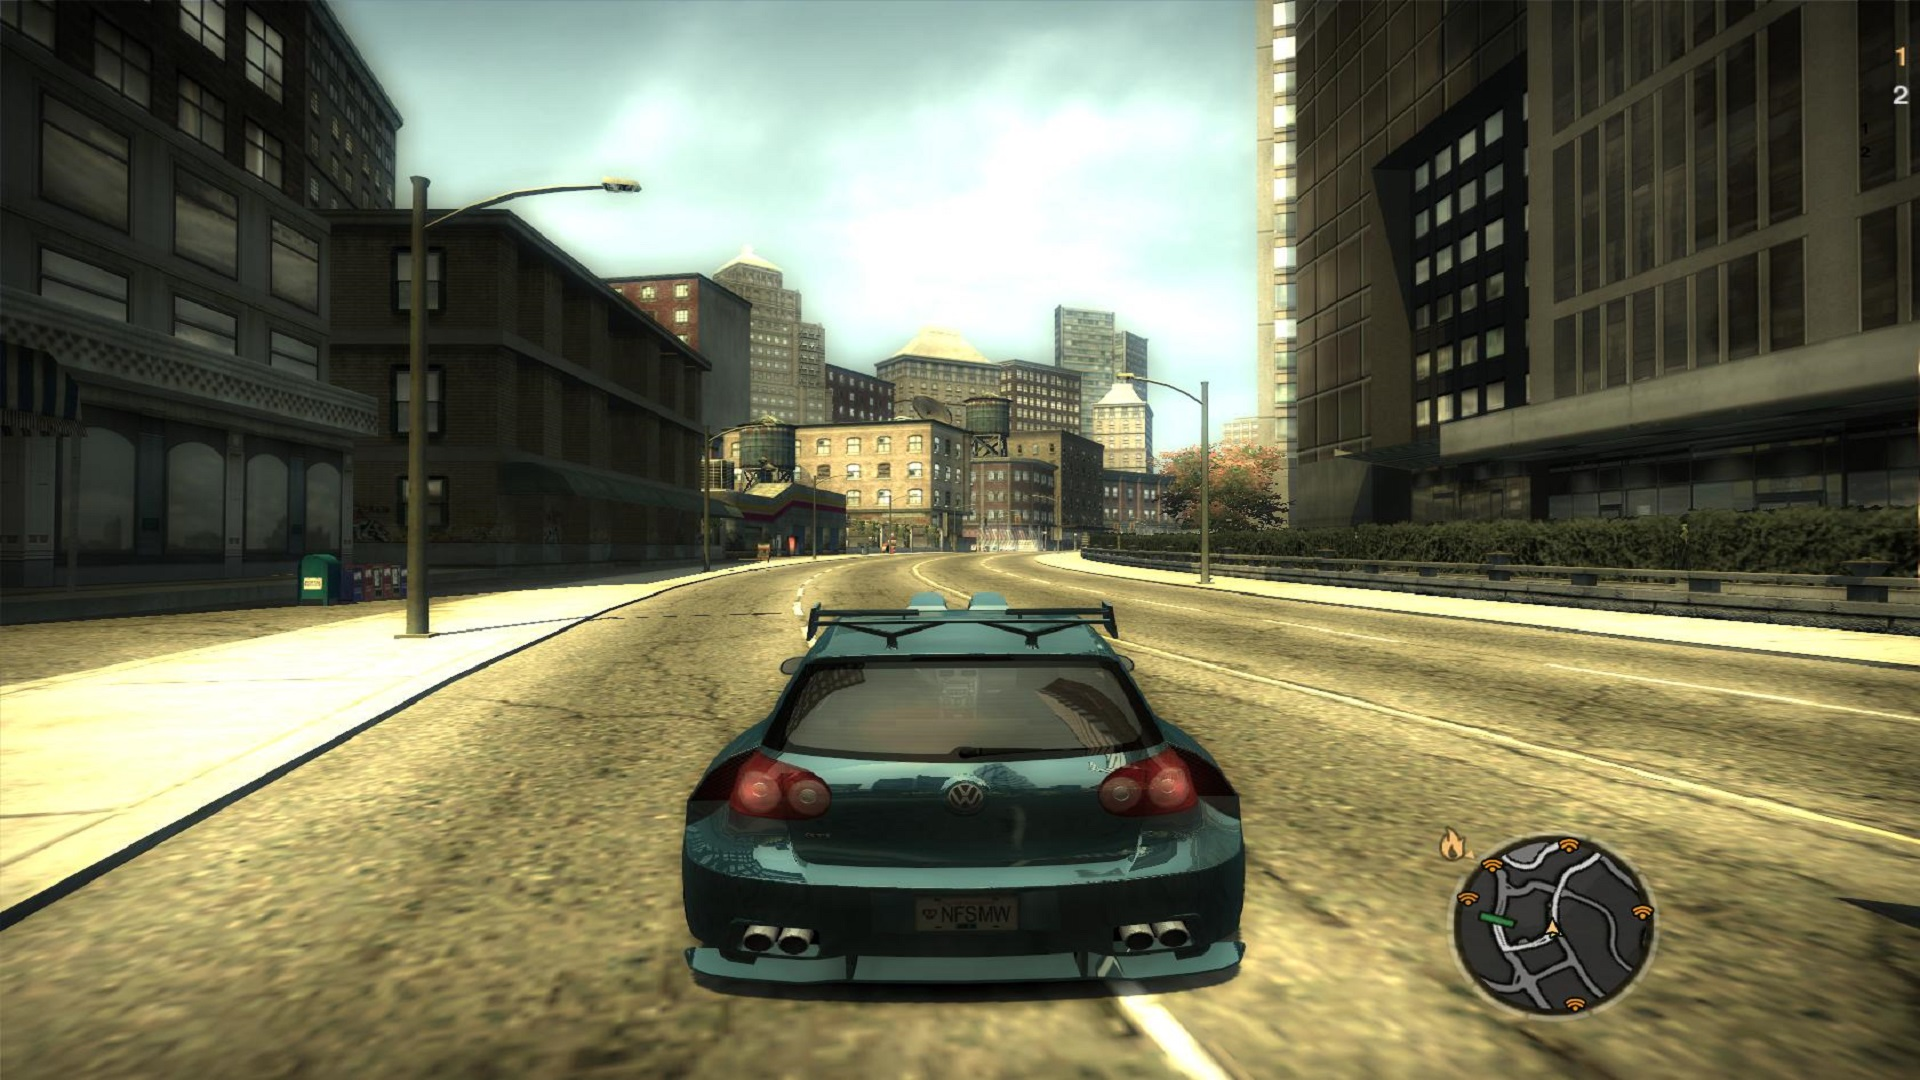 Need for speed wanted game. NFS most wanted 2005 геймплей. Most Water 2005. Гонки NFS most wanted 2005. NFS most wanted 2005 мост.